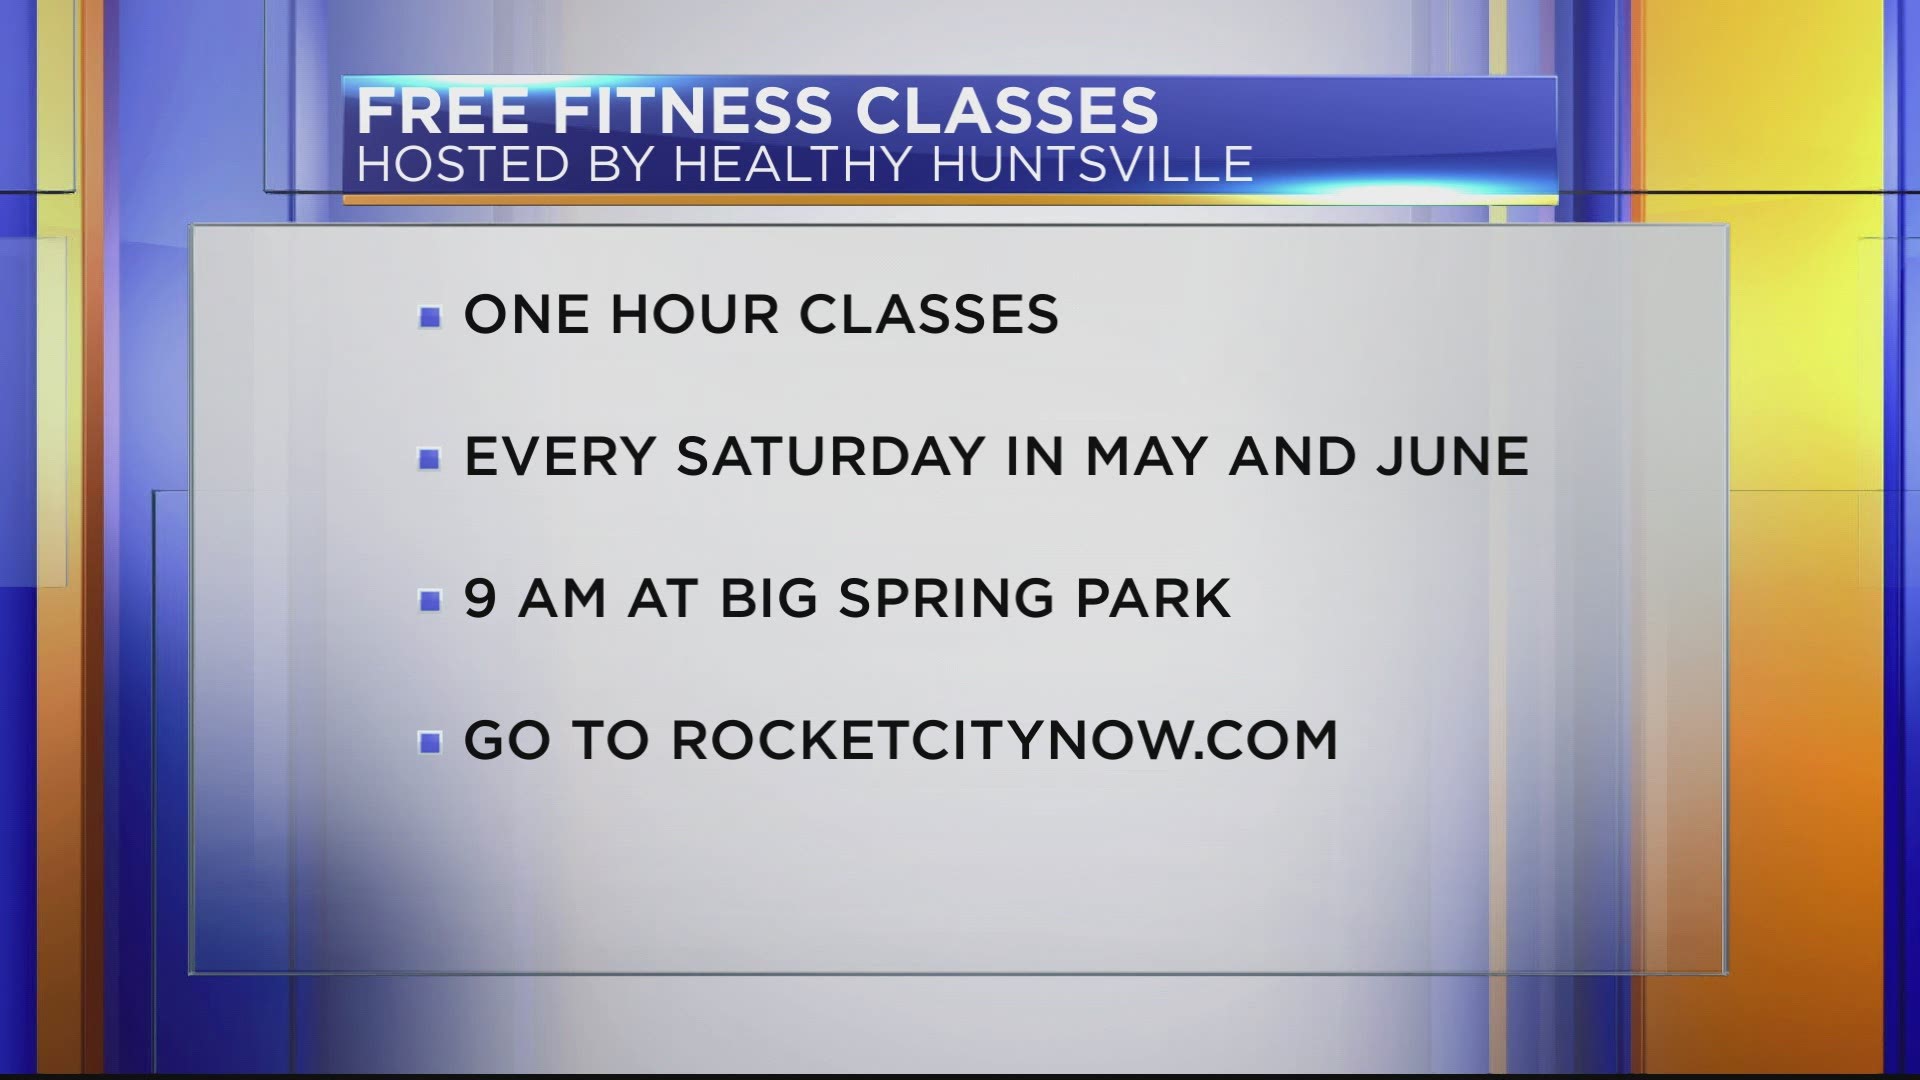 Each one-hour class is designed to challenge participants in different ways and can be modified to a personal comfort level, Healthy Huntsville said.